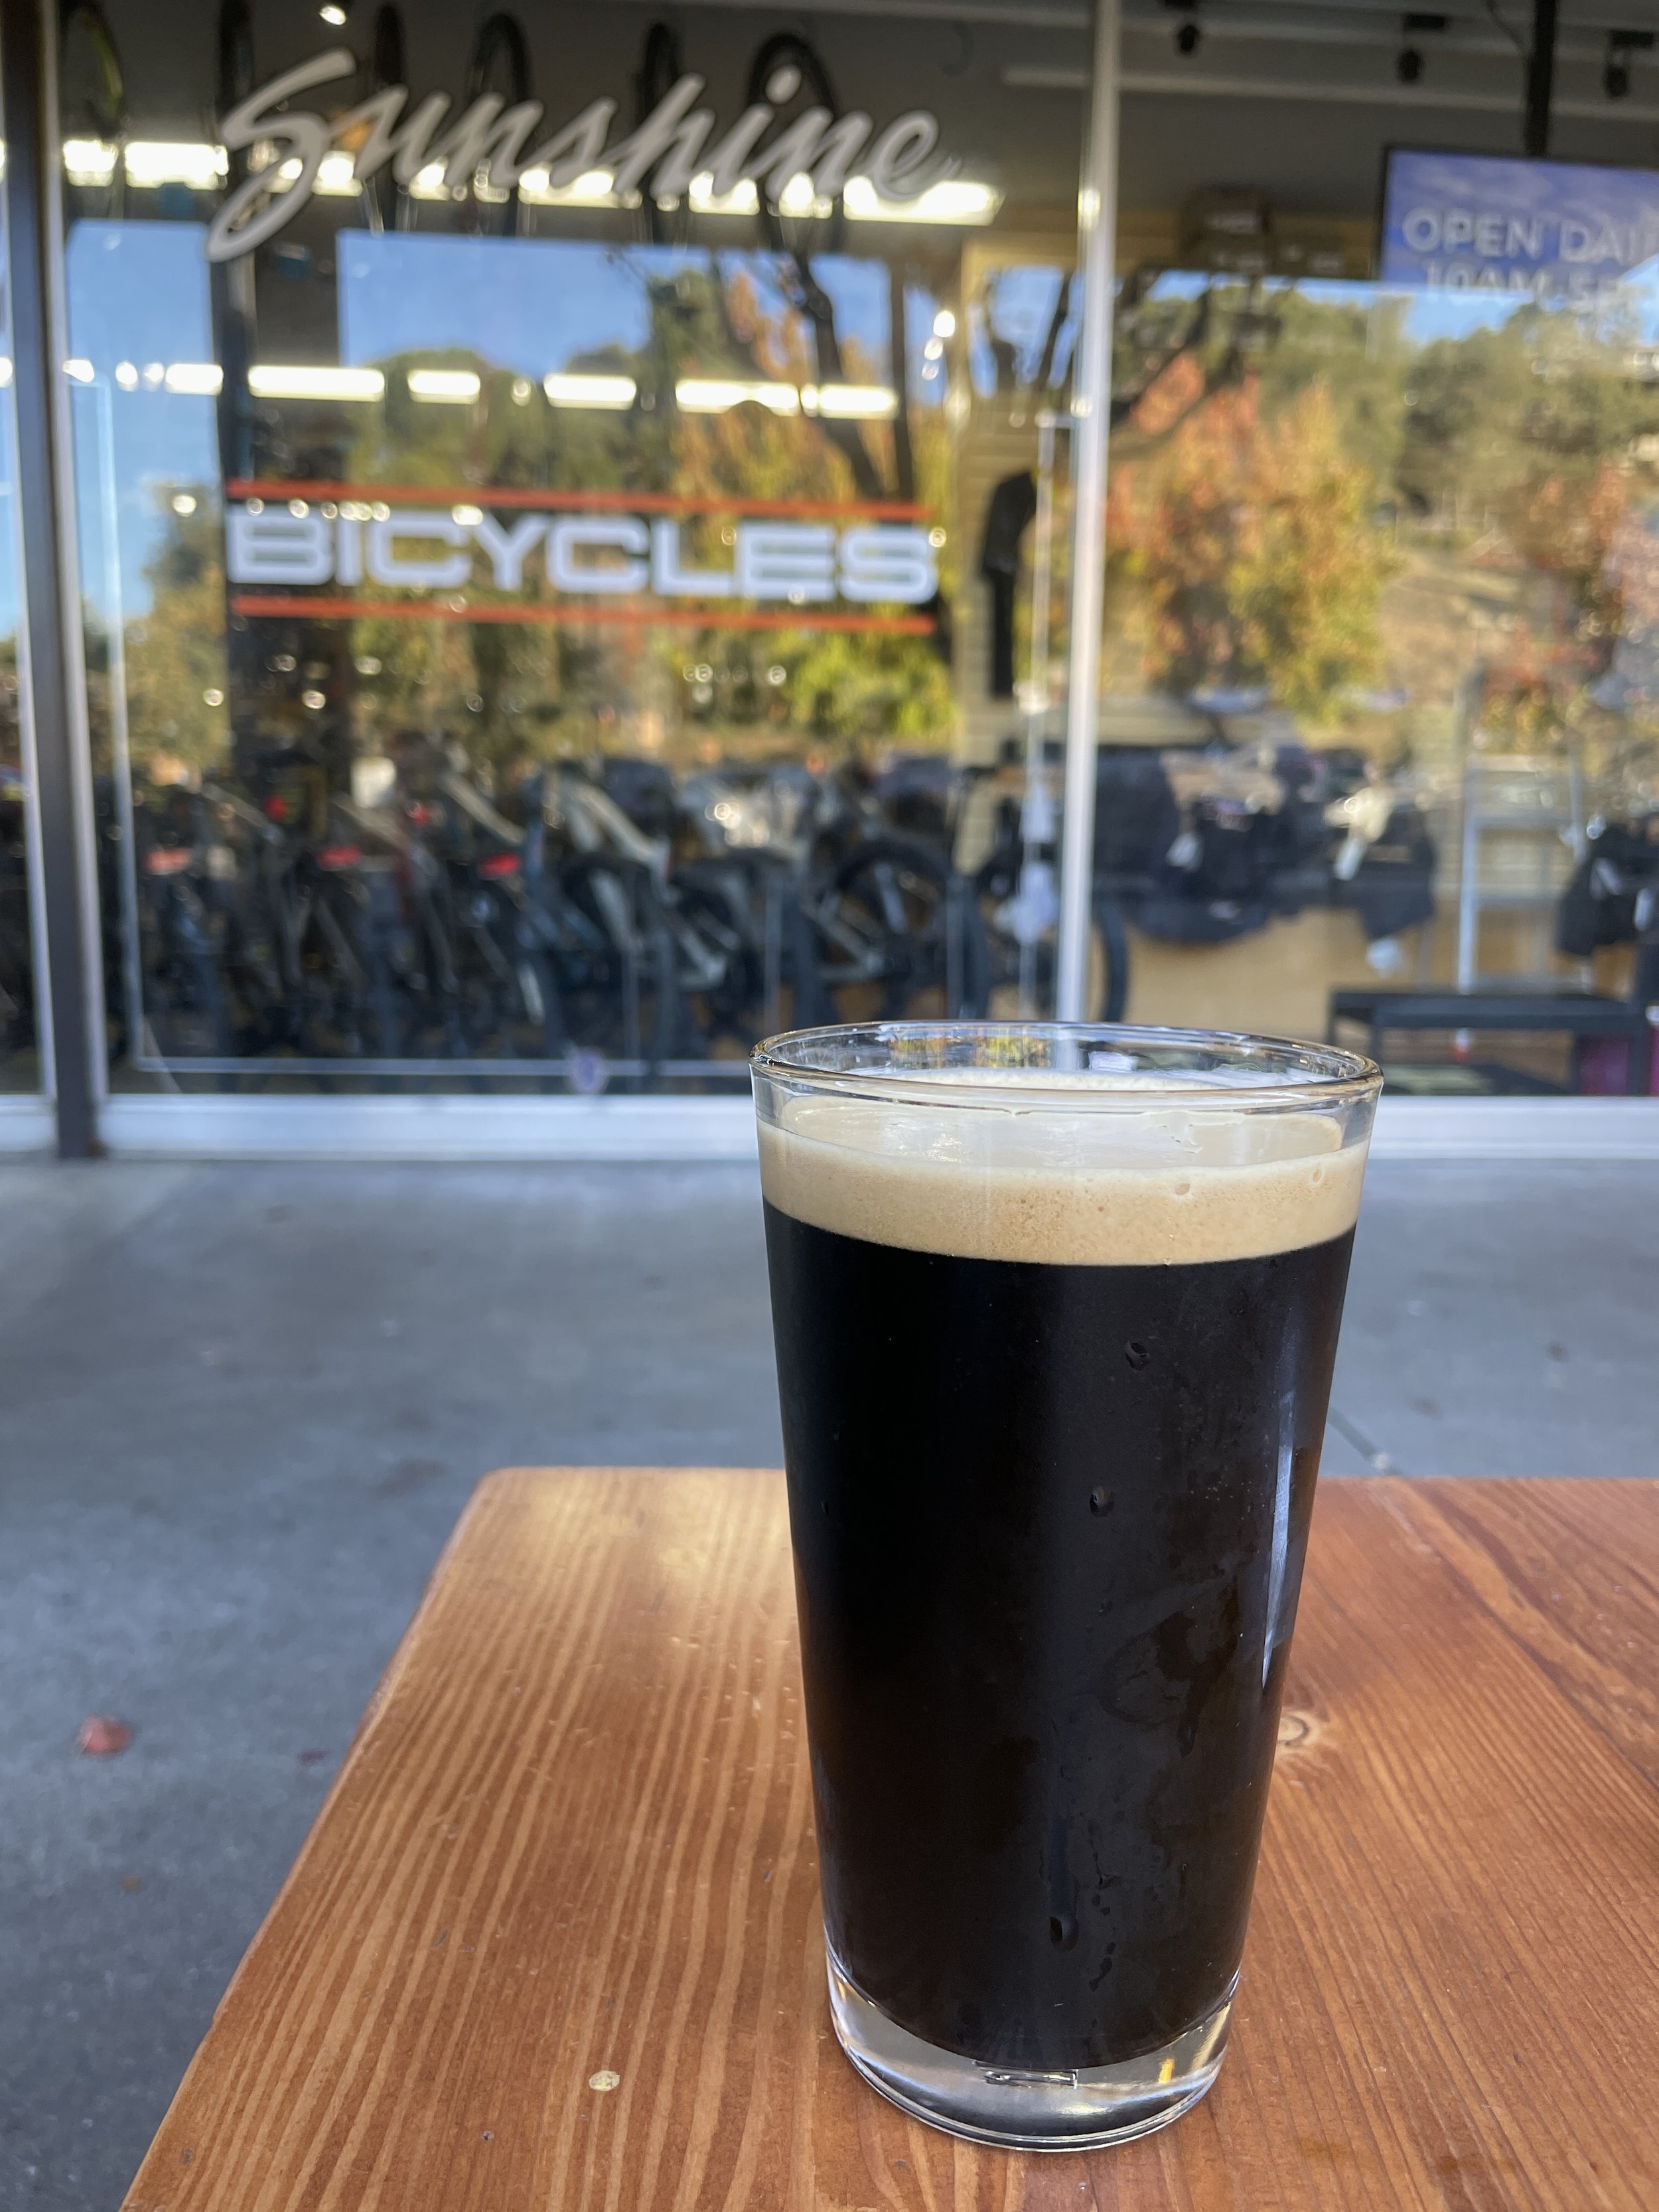 Sless' Oatmeal Stout by Iron Springs Pub &amp; Brewery. There will be no more as they became the Hen House Brewing Co. on November 15th.